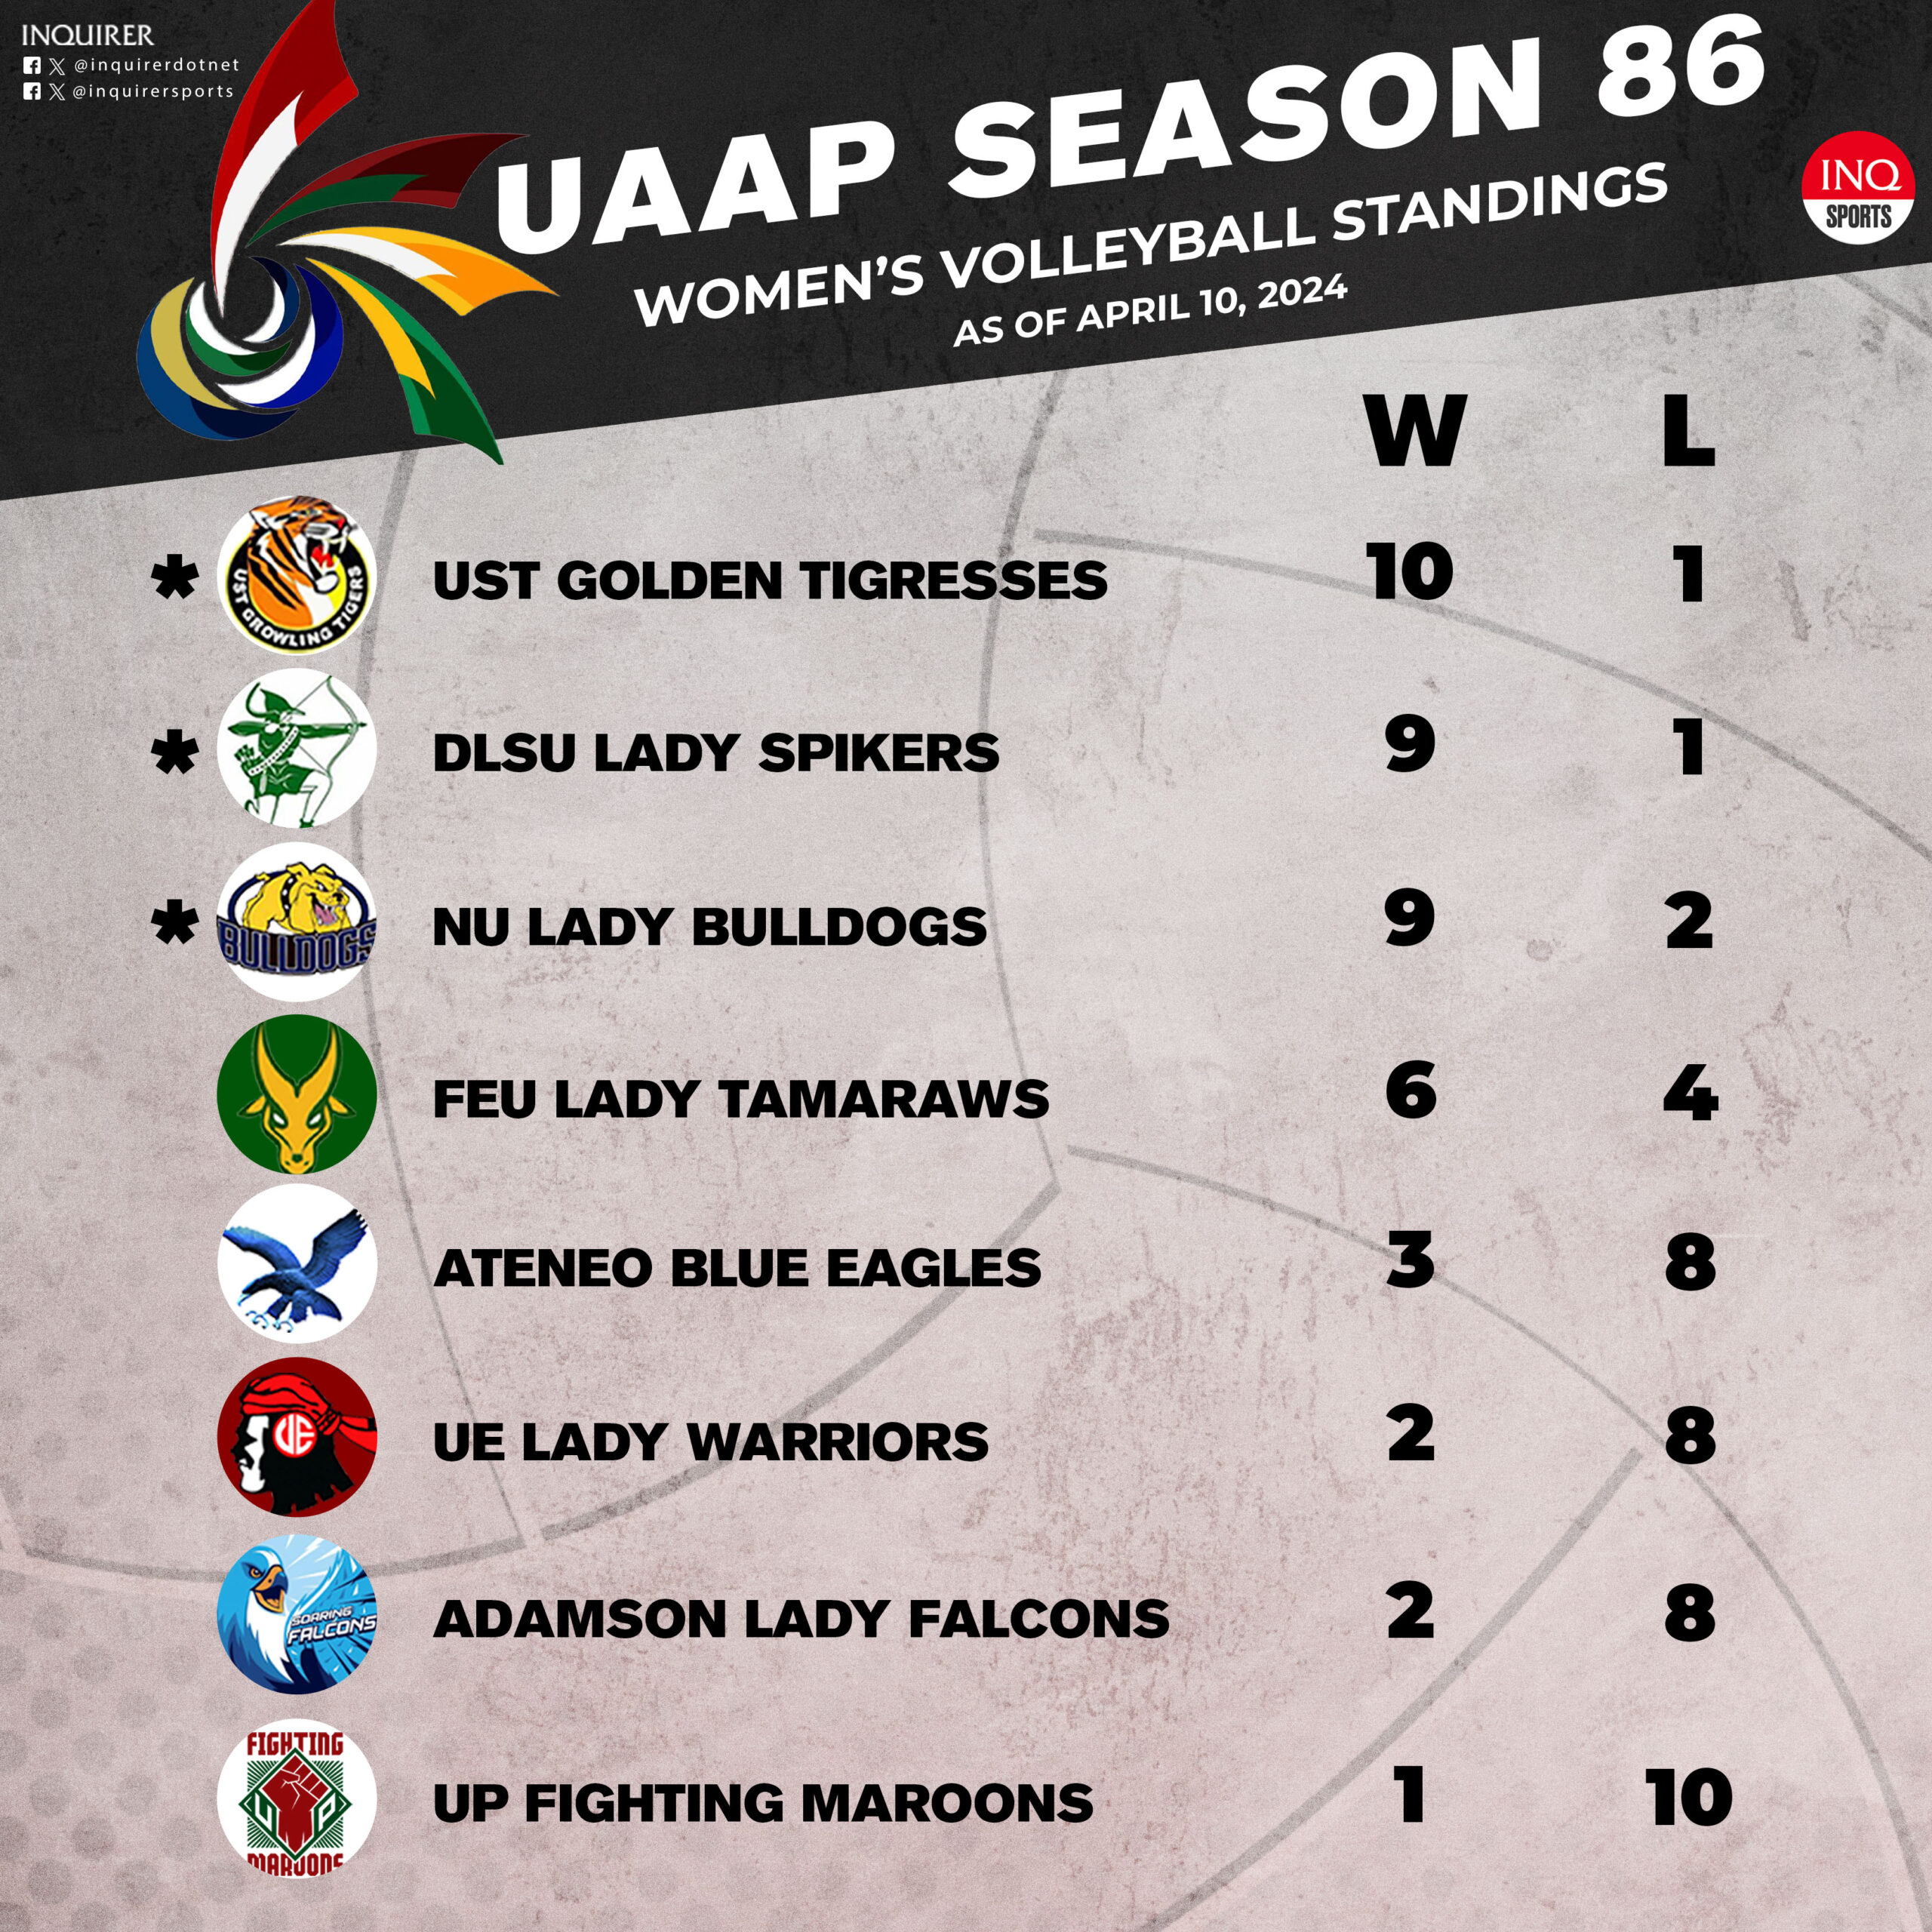 UAAP women's volleyball standings as of April 10